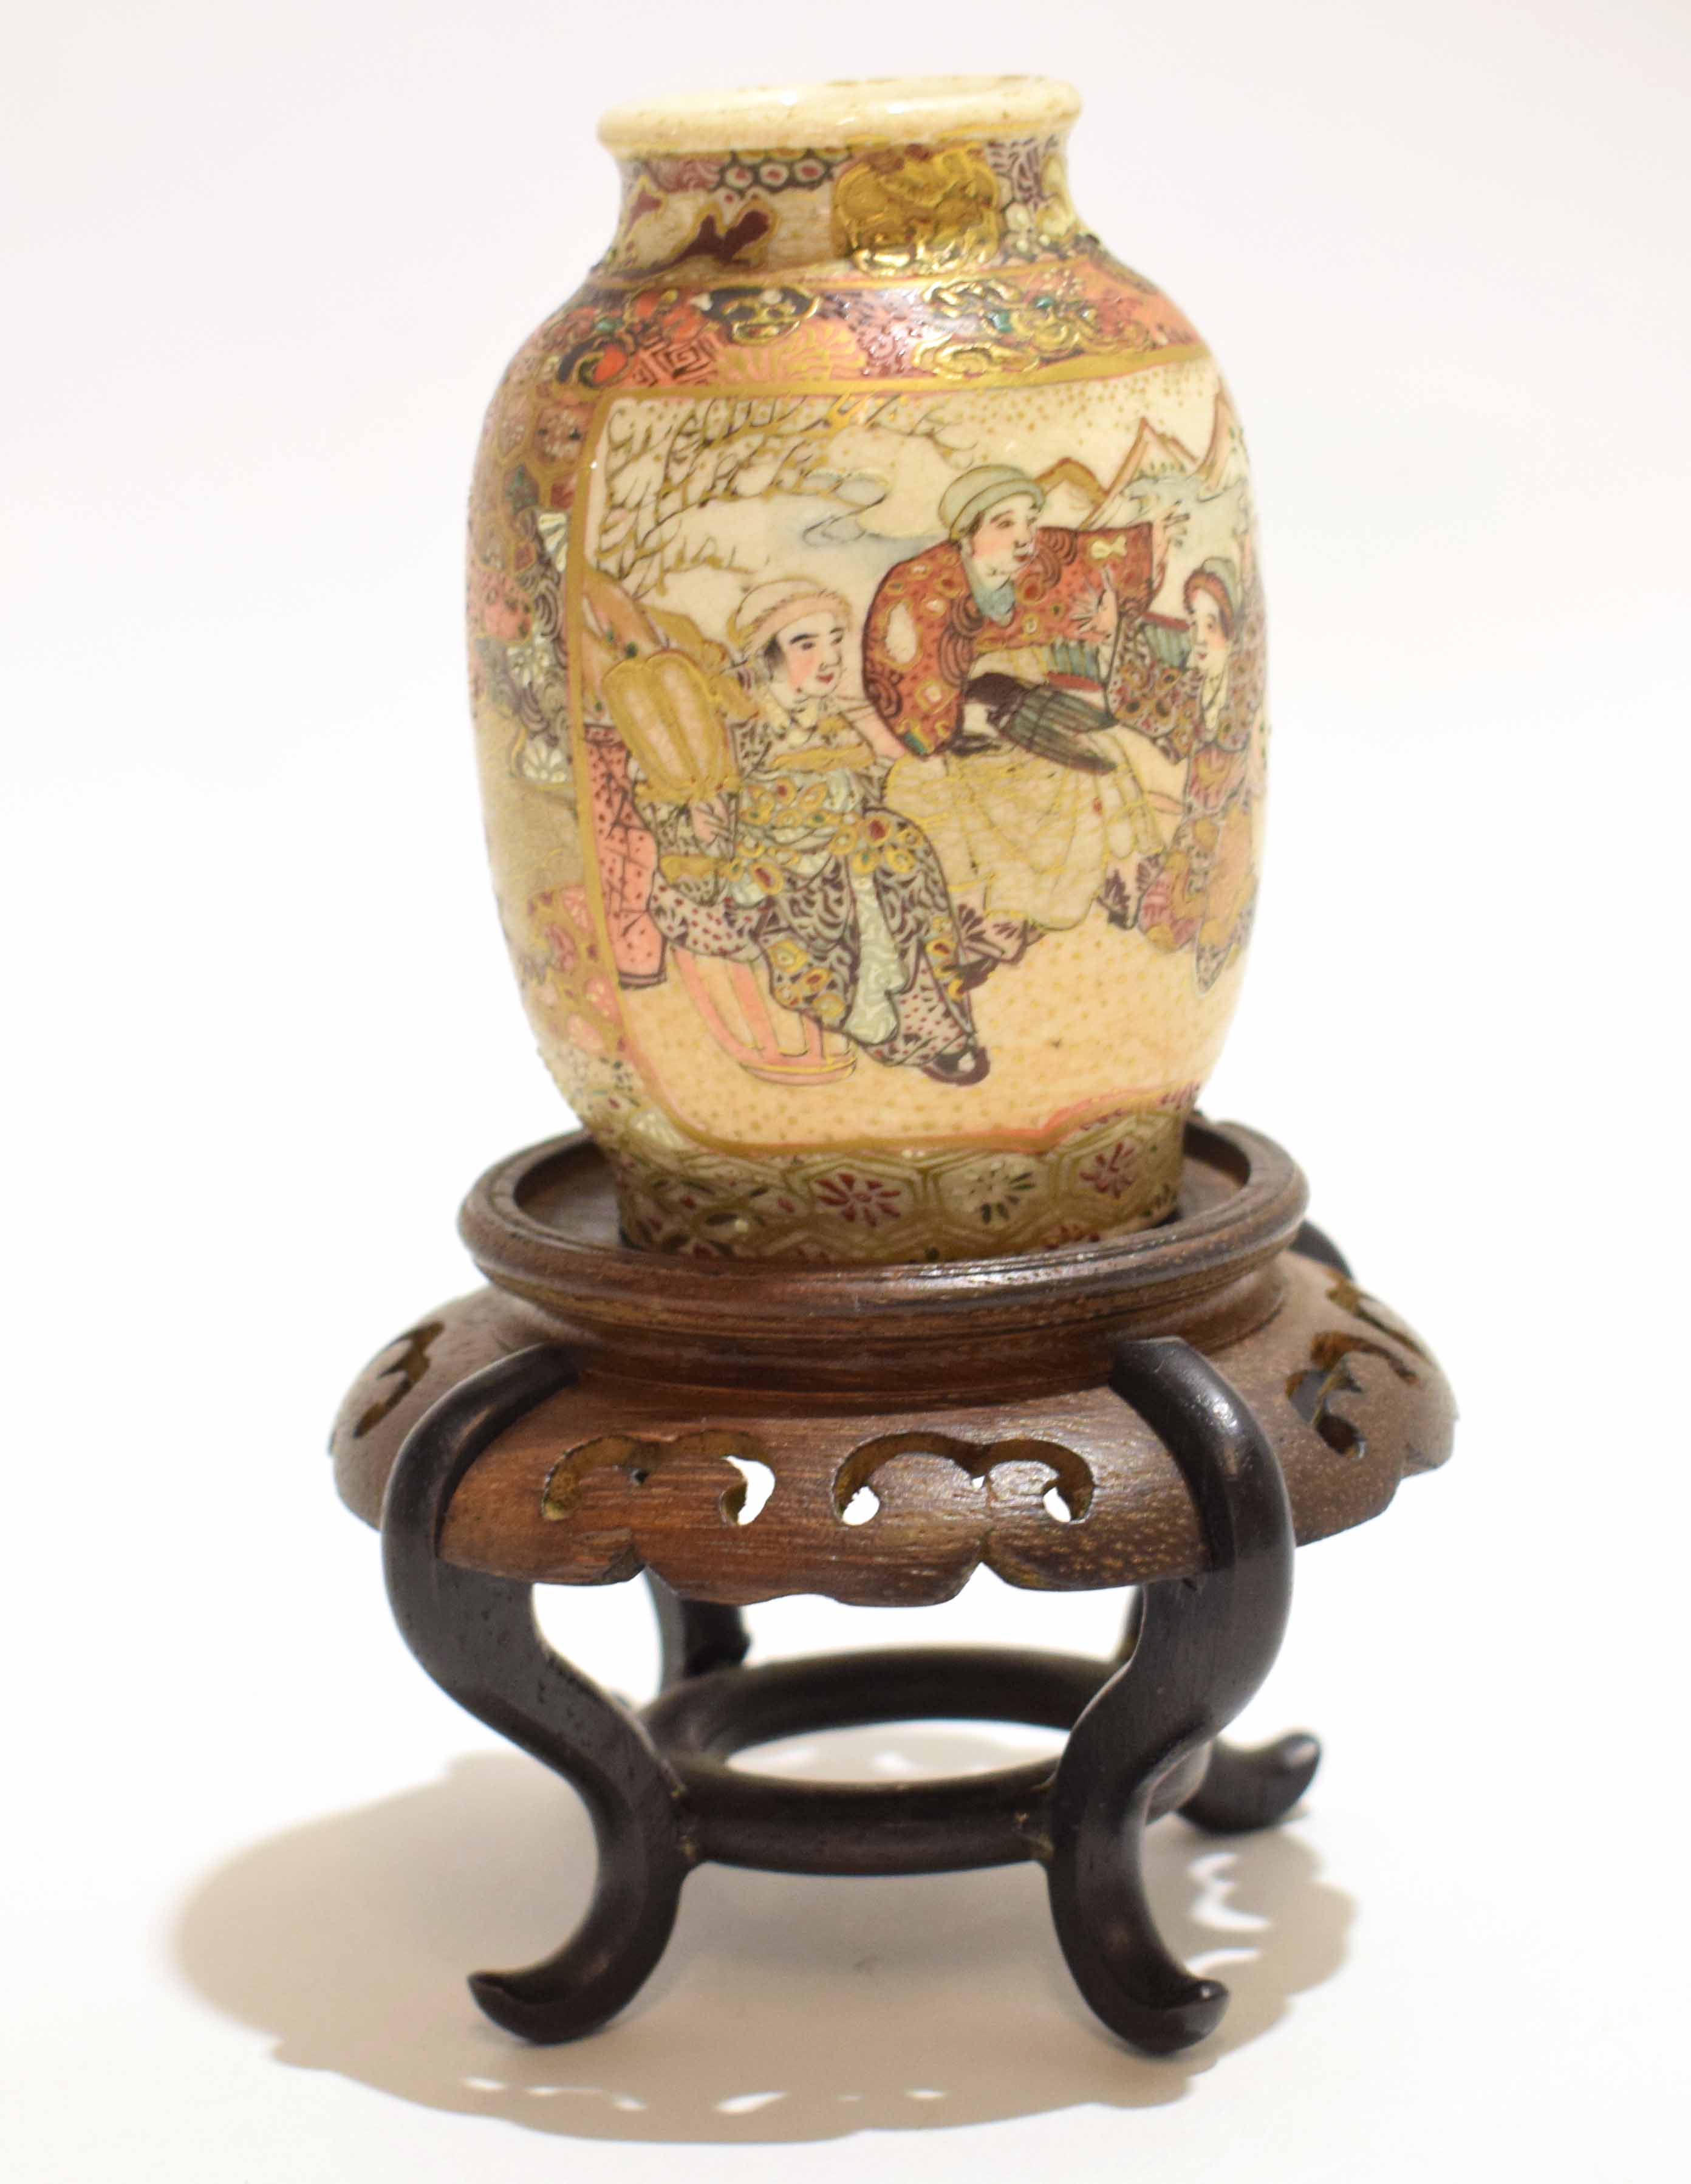 Satsuma earthenware vase with two panels, one with figures in a garden setting with a panel of